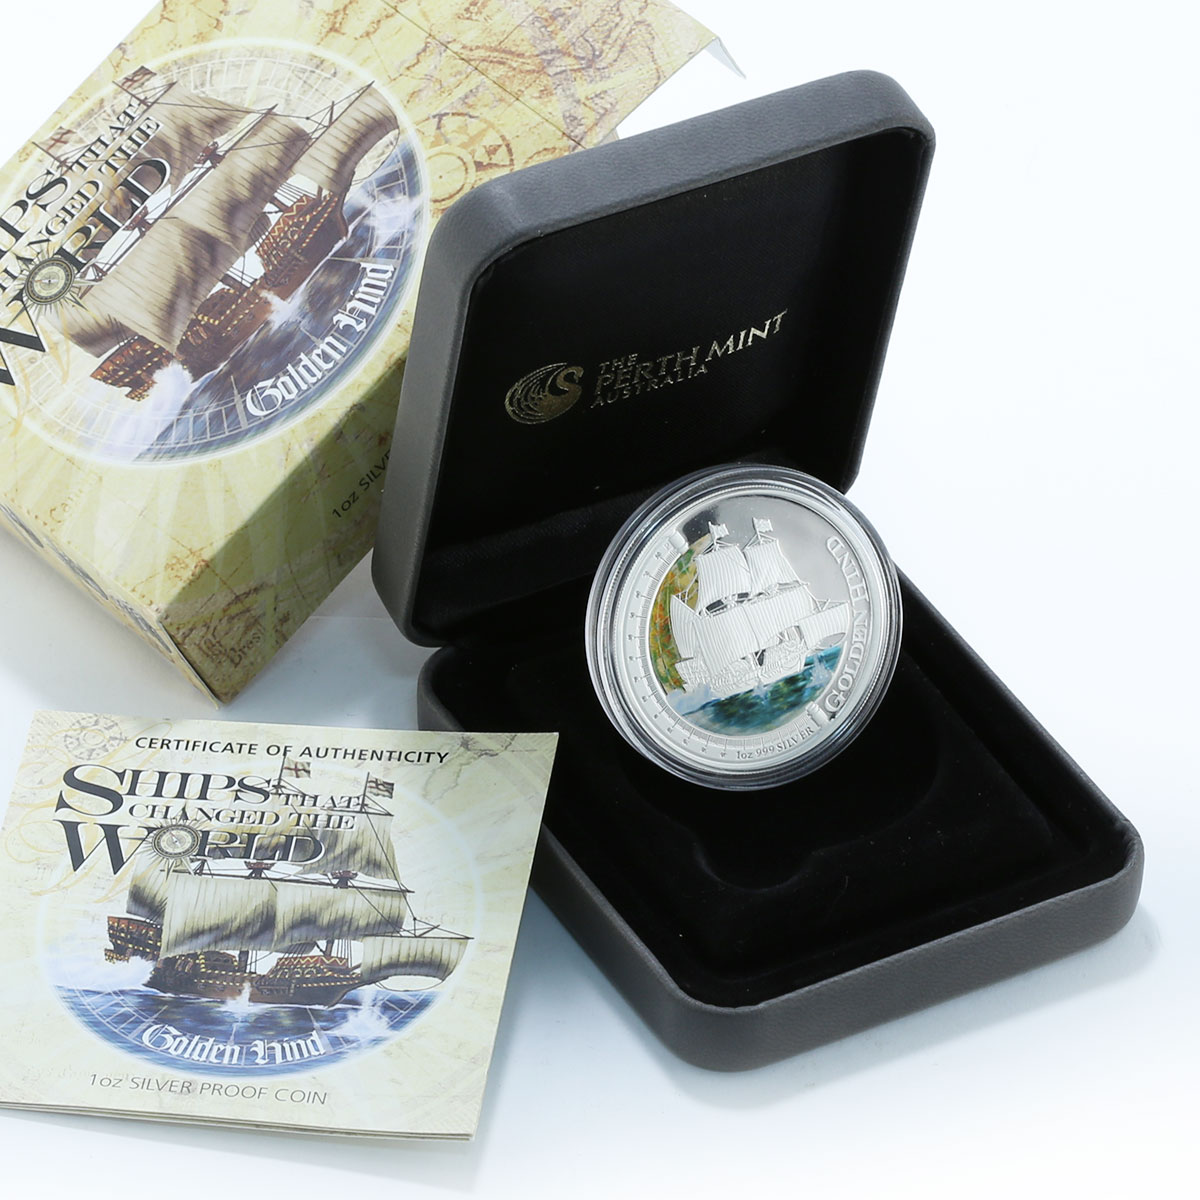 Tuvalu 1 Dollar Ship Golden Hind silver proof colorized coin 2011